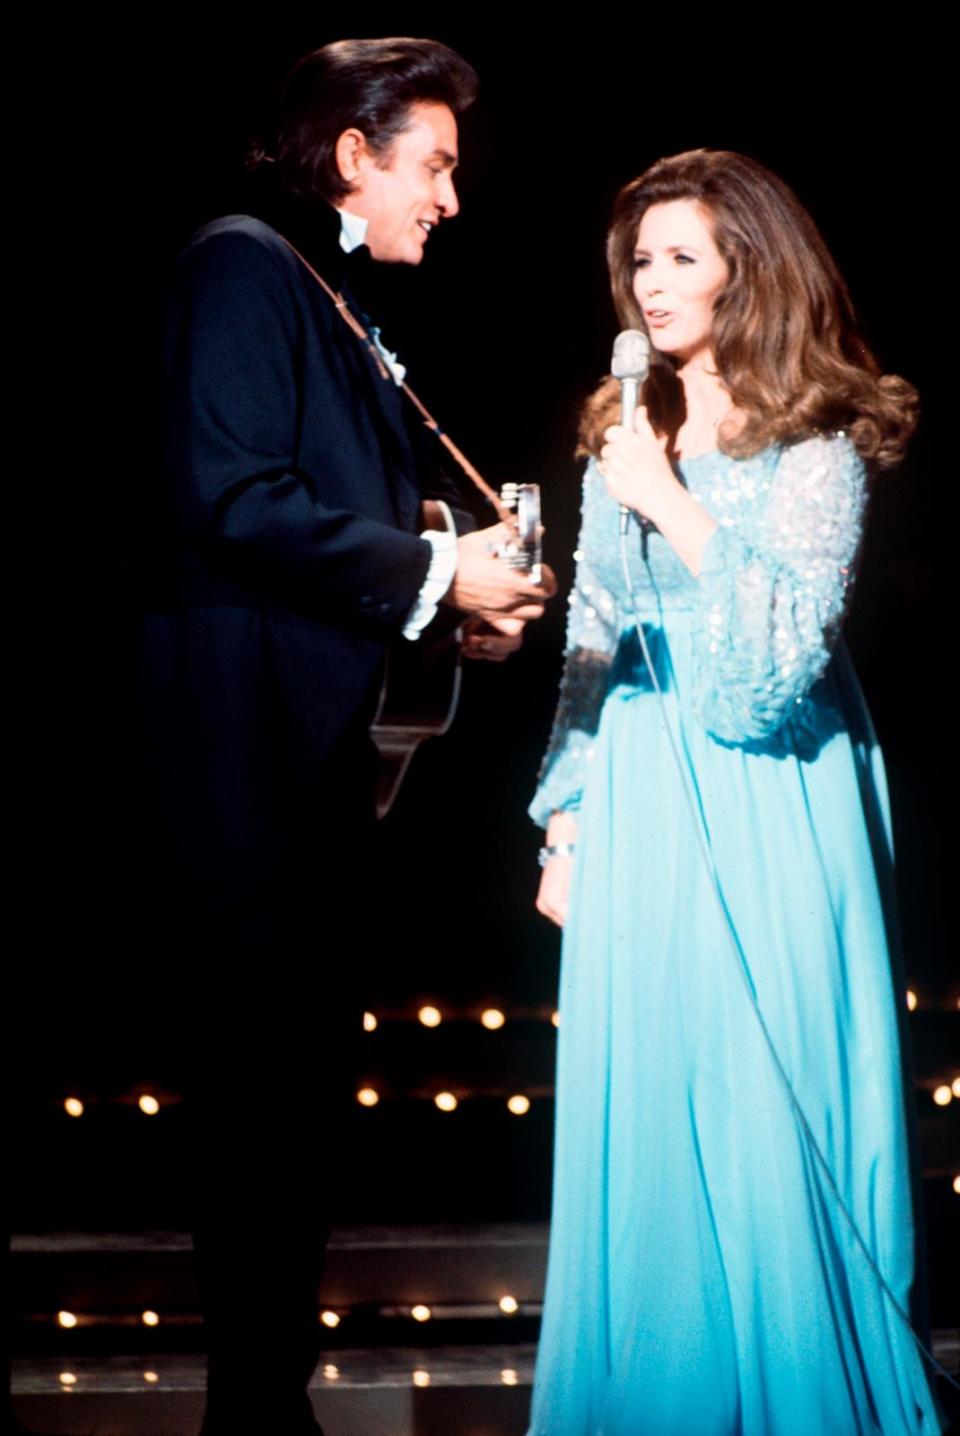 PHOTO: Johnny Cash and June Carter Cash sing at the Grand Ole Opry, in Nashville, Tenn., on April 10, 1970. (ABC Photo Archives via Getty Images, FILE)